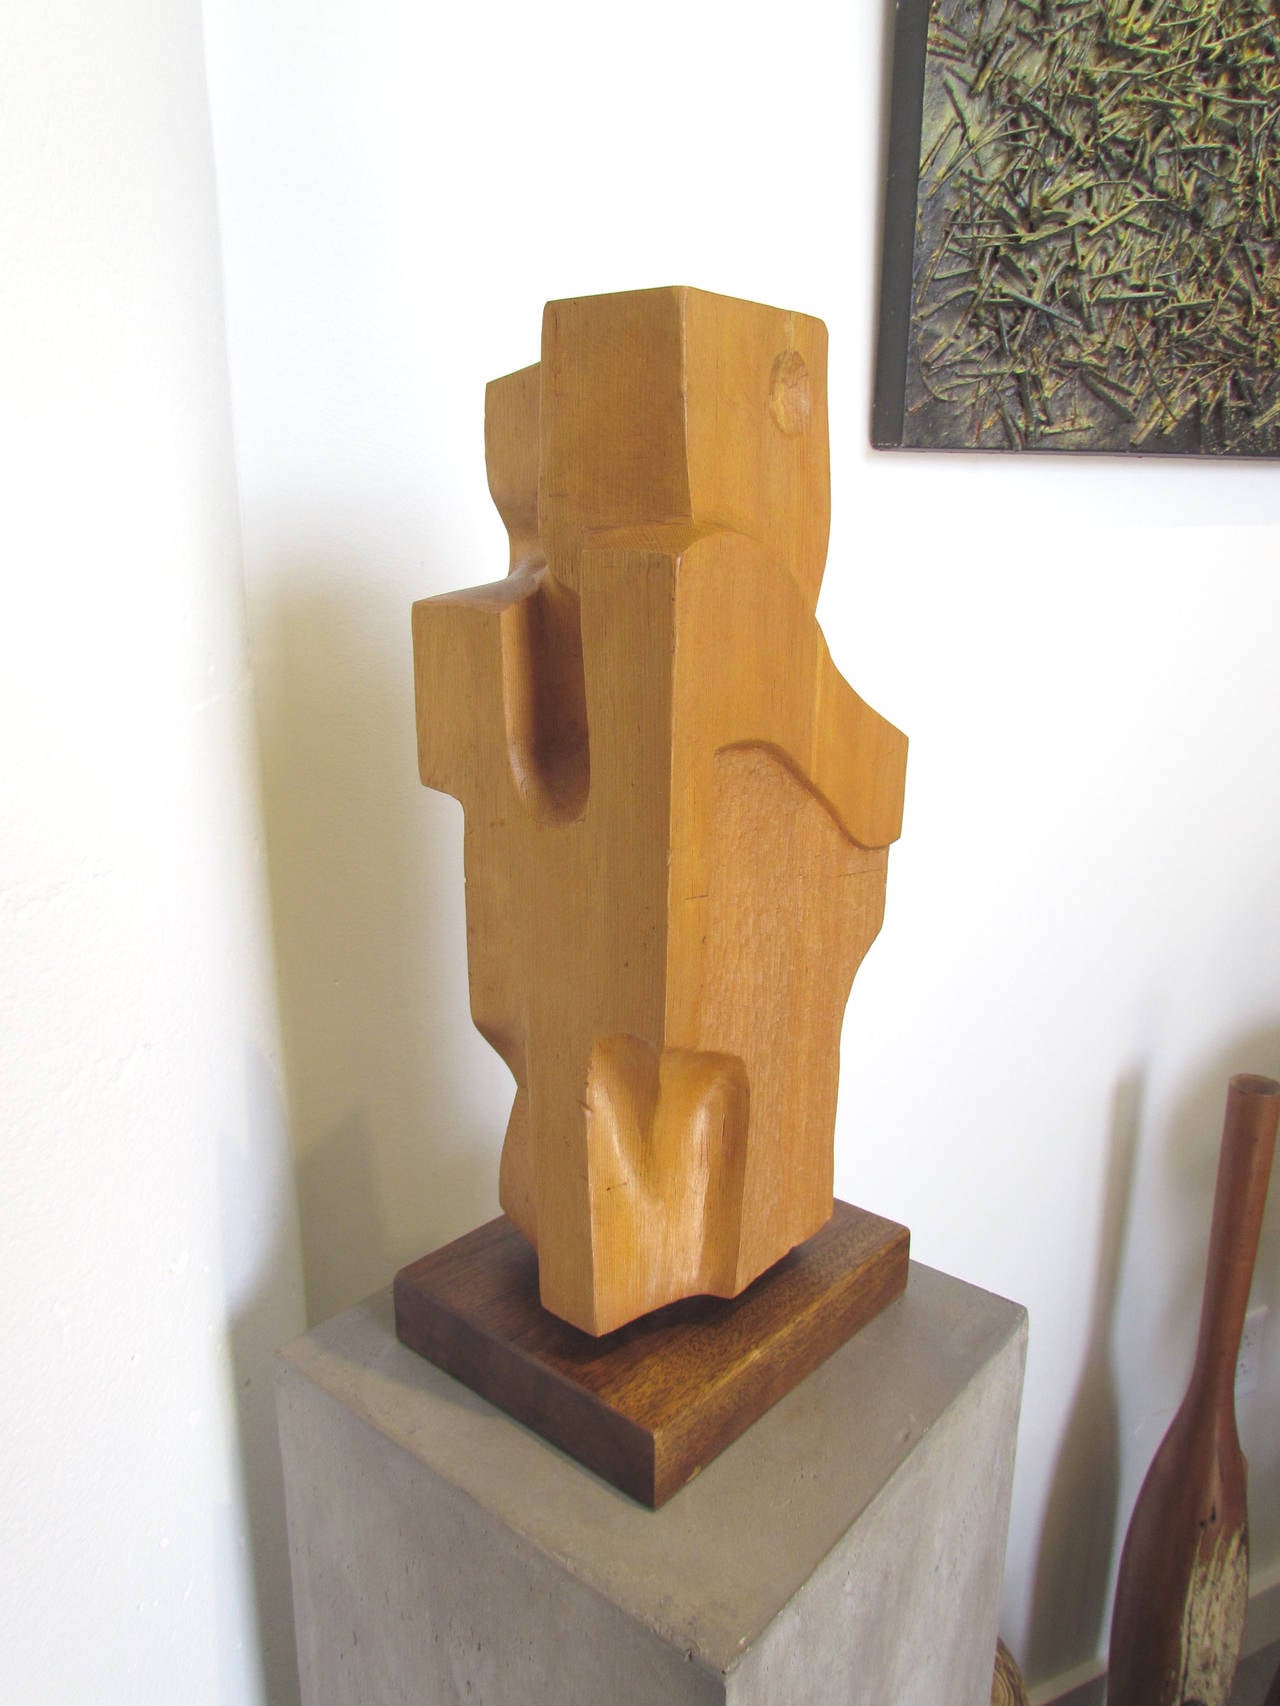 Late 20th Century Abstract Hand-Carved Wood Sculpture Signed and Dated 1971